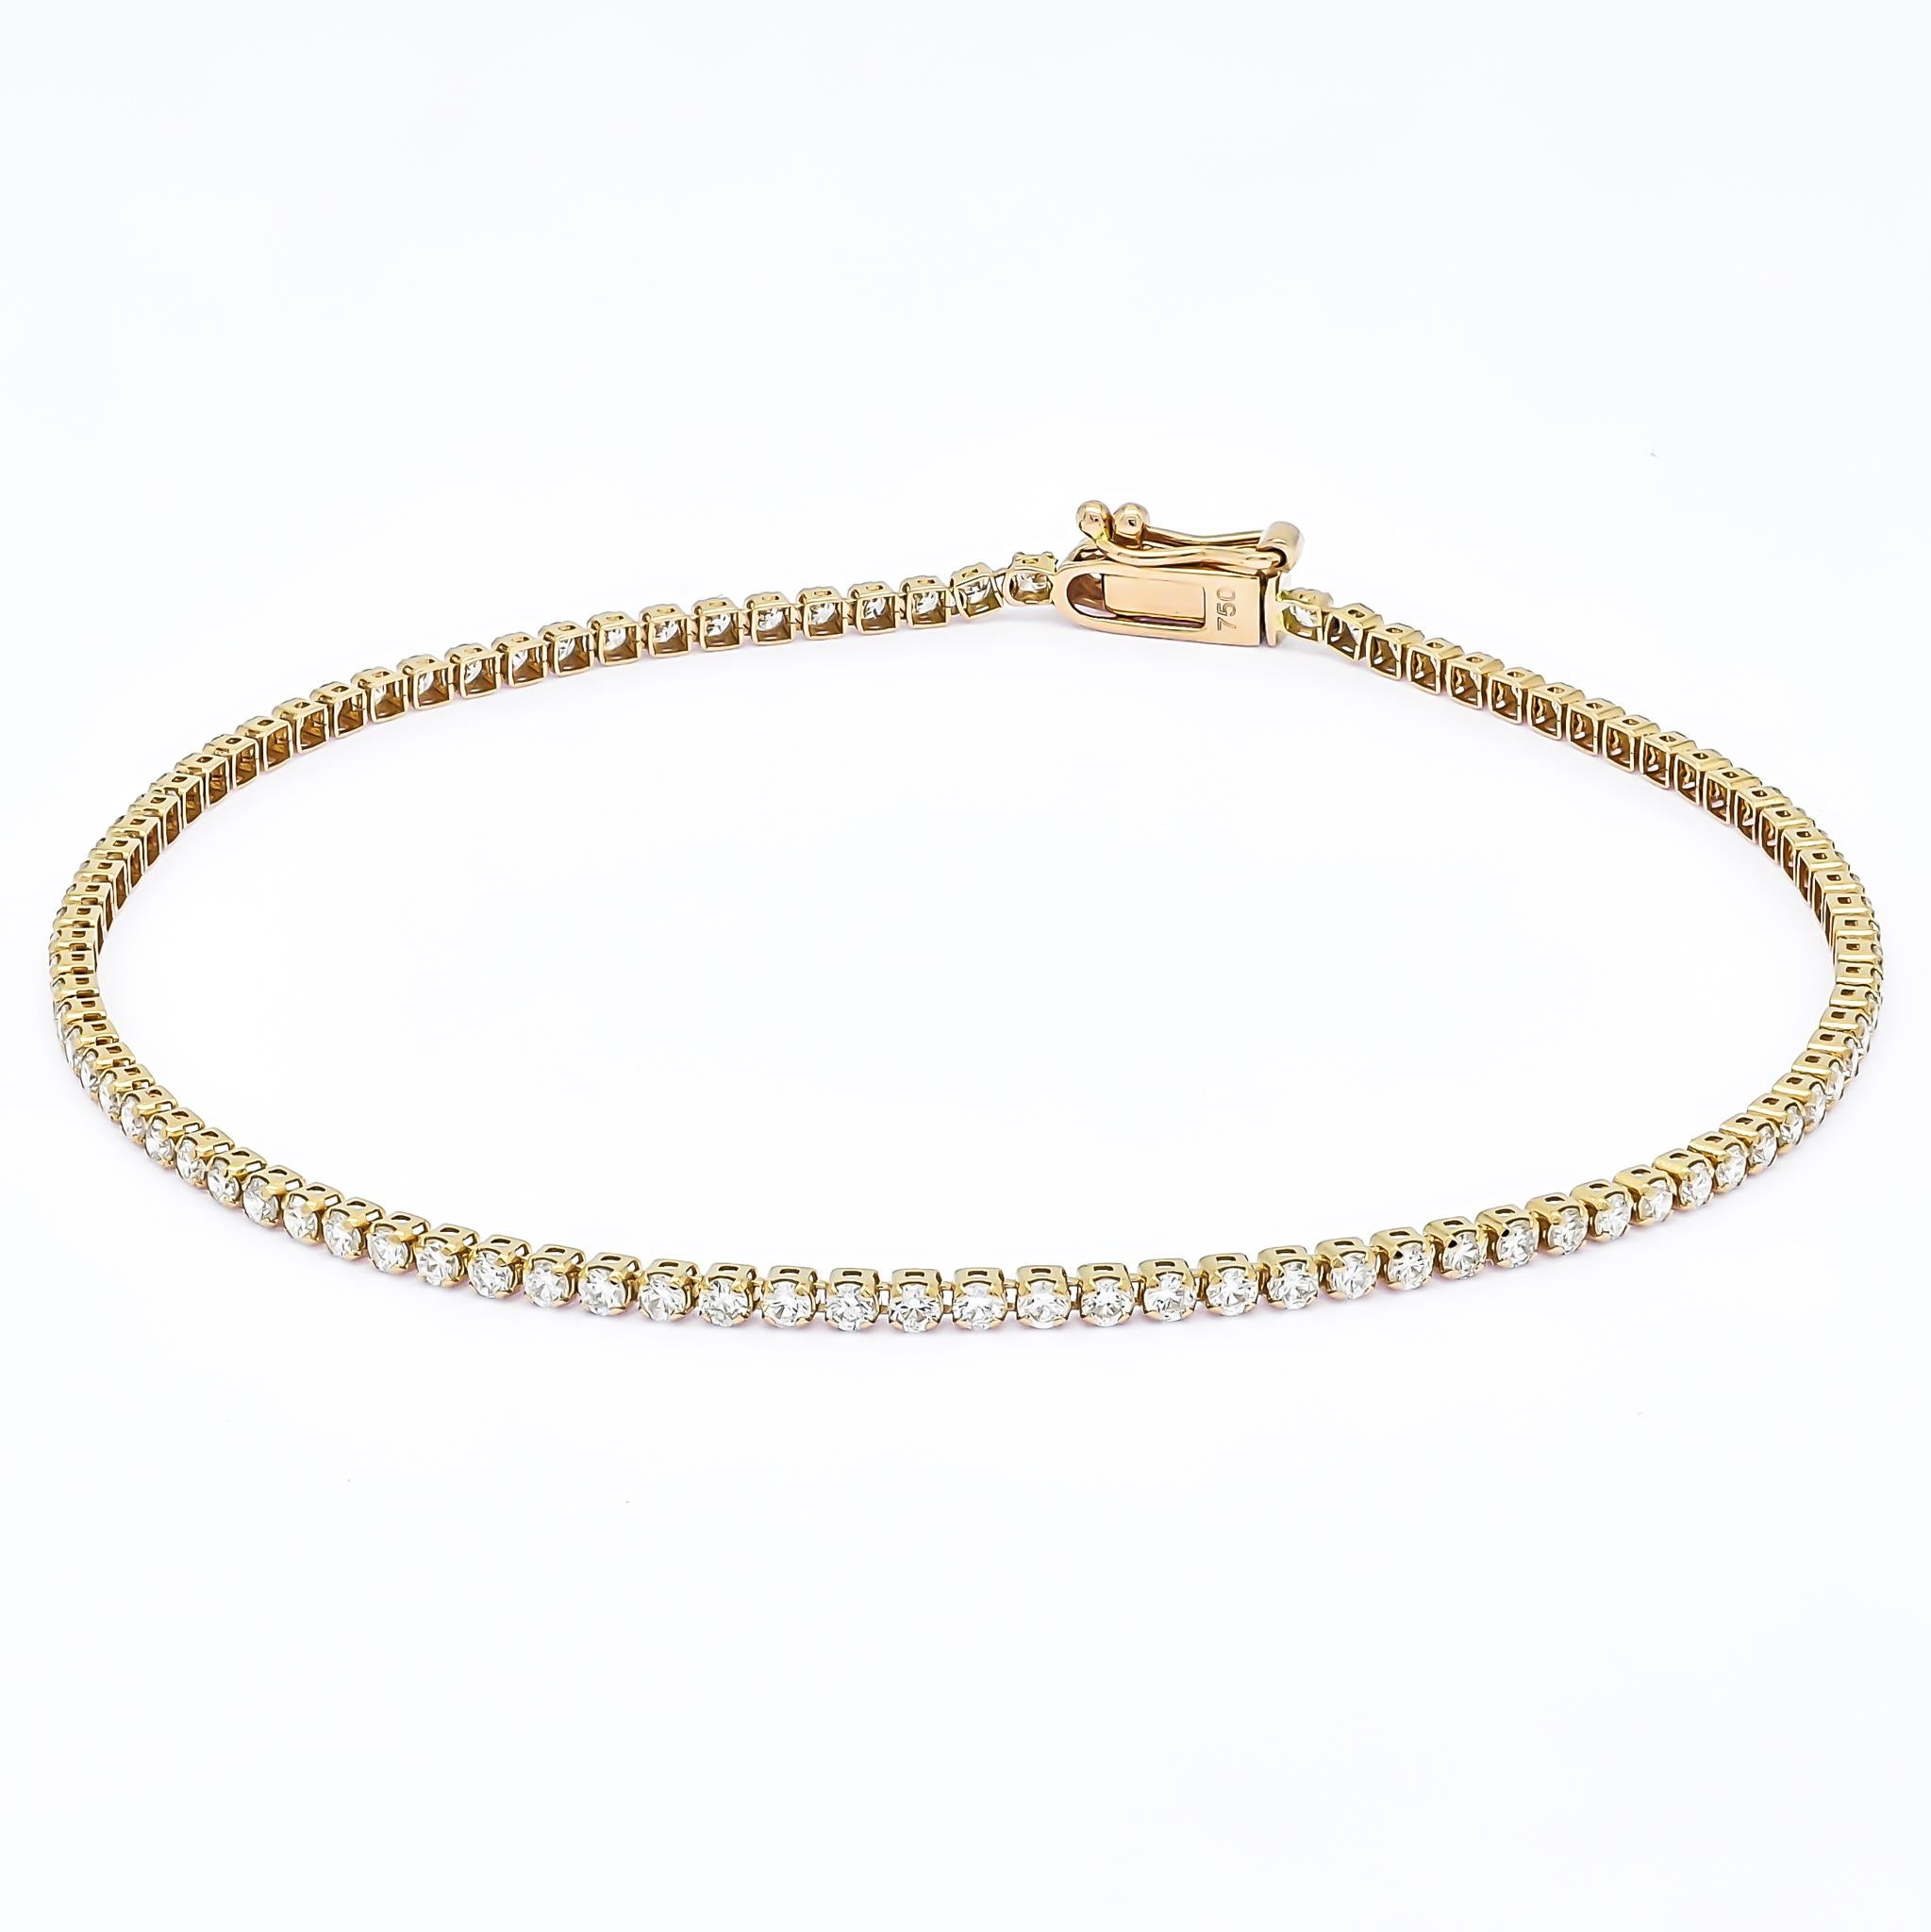 Elevate your style with this luxurious 18Kt yellow gold single-row tennis bracelet. Expertly crafted with four prong setting, it features sparkling, brilliant-cut natural diamonds that exude elegance and luxury. The single-row design adds a touch of